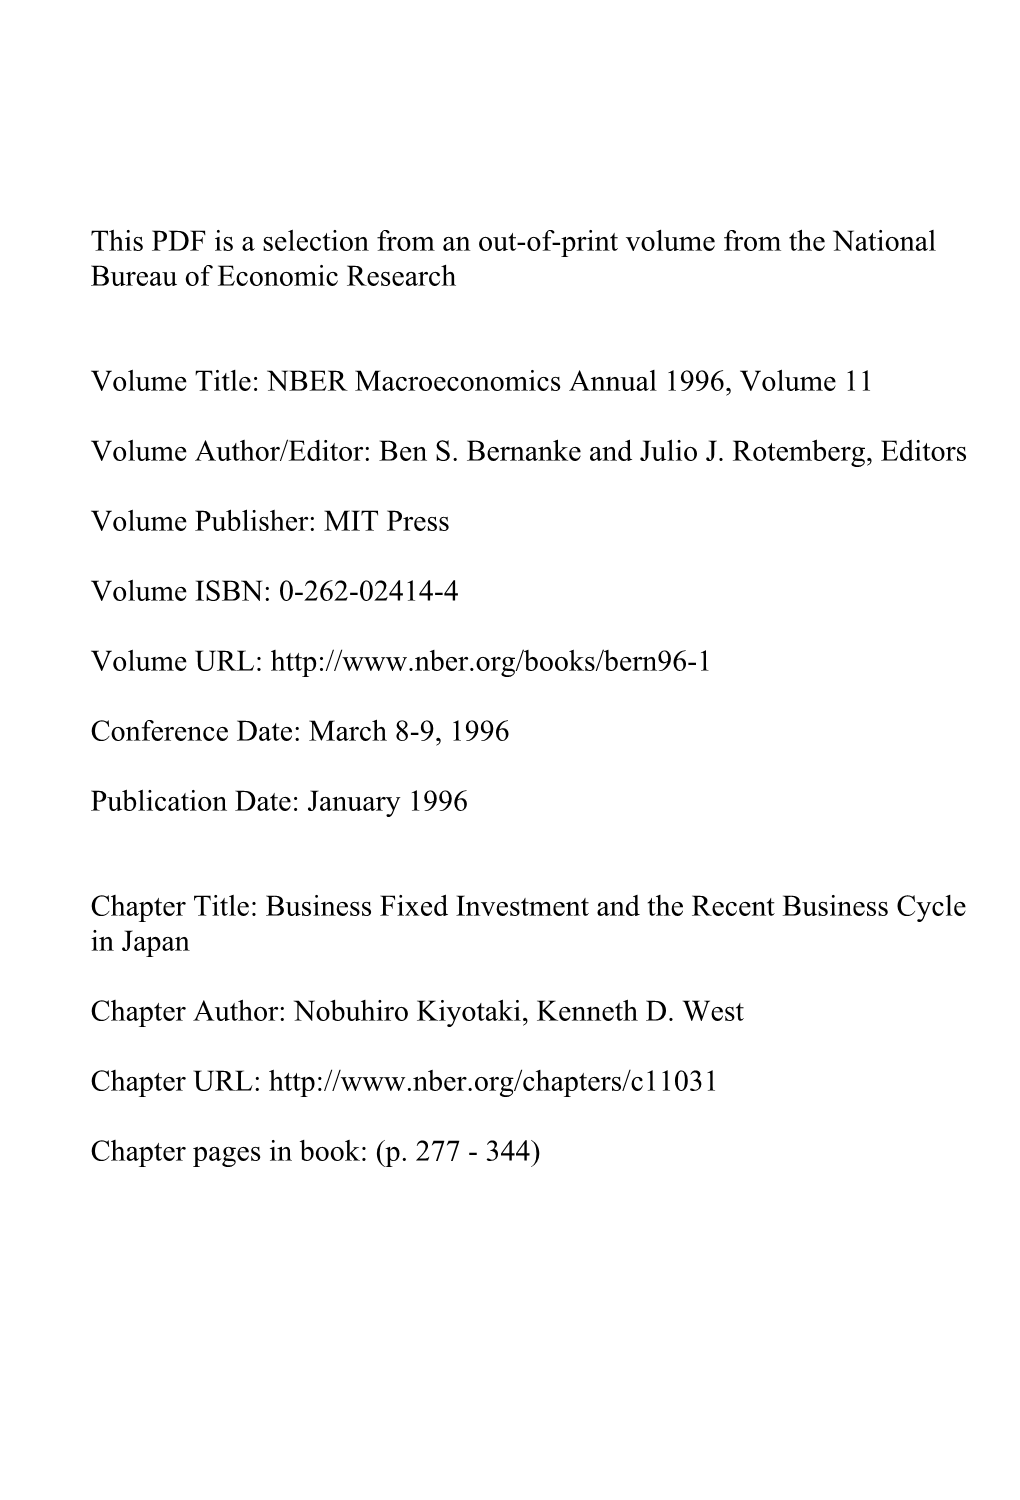 Business Fixed Investment and the Recent Business Cycle in Japan